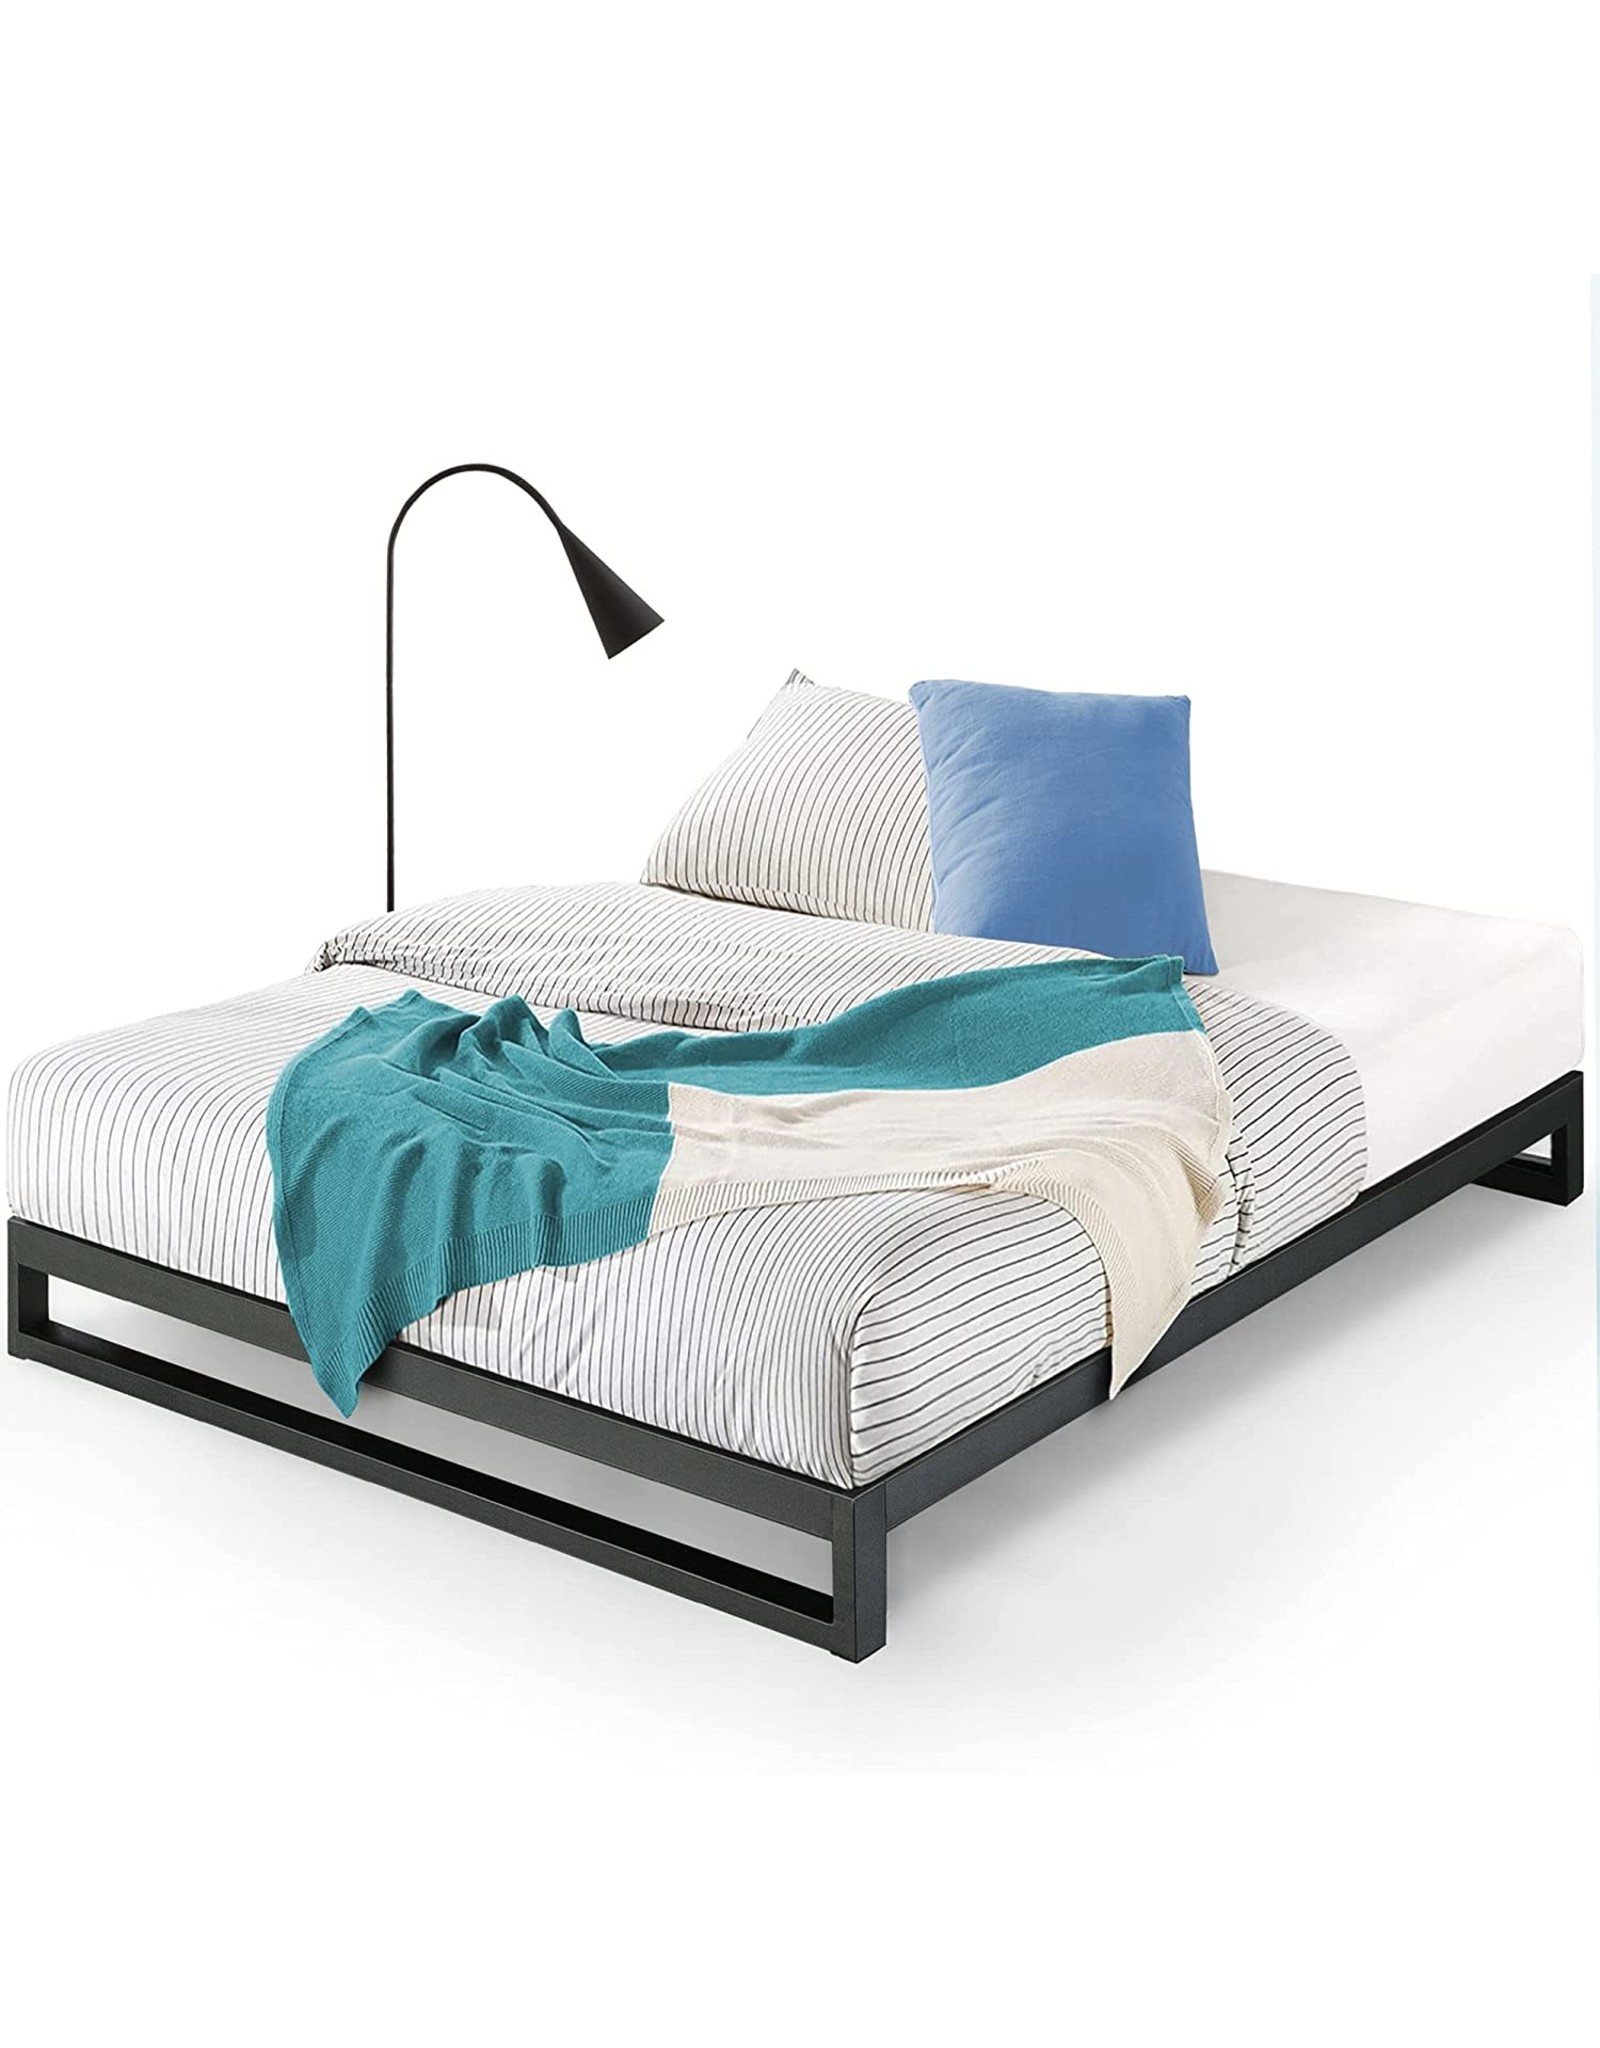 Zinus Trisha Metal Platforma Bed Frame, How To Support A Bed Frame With Wood